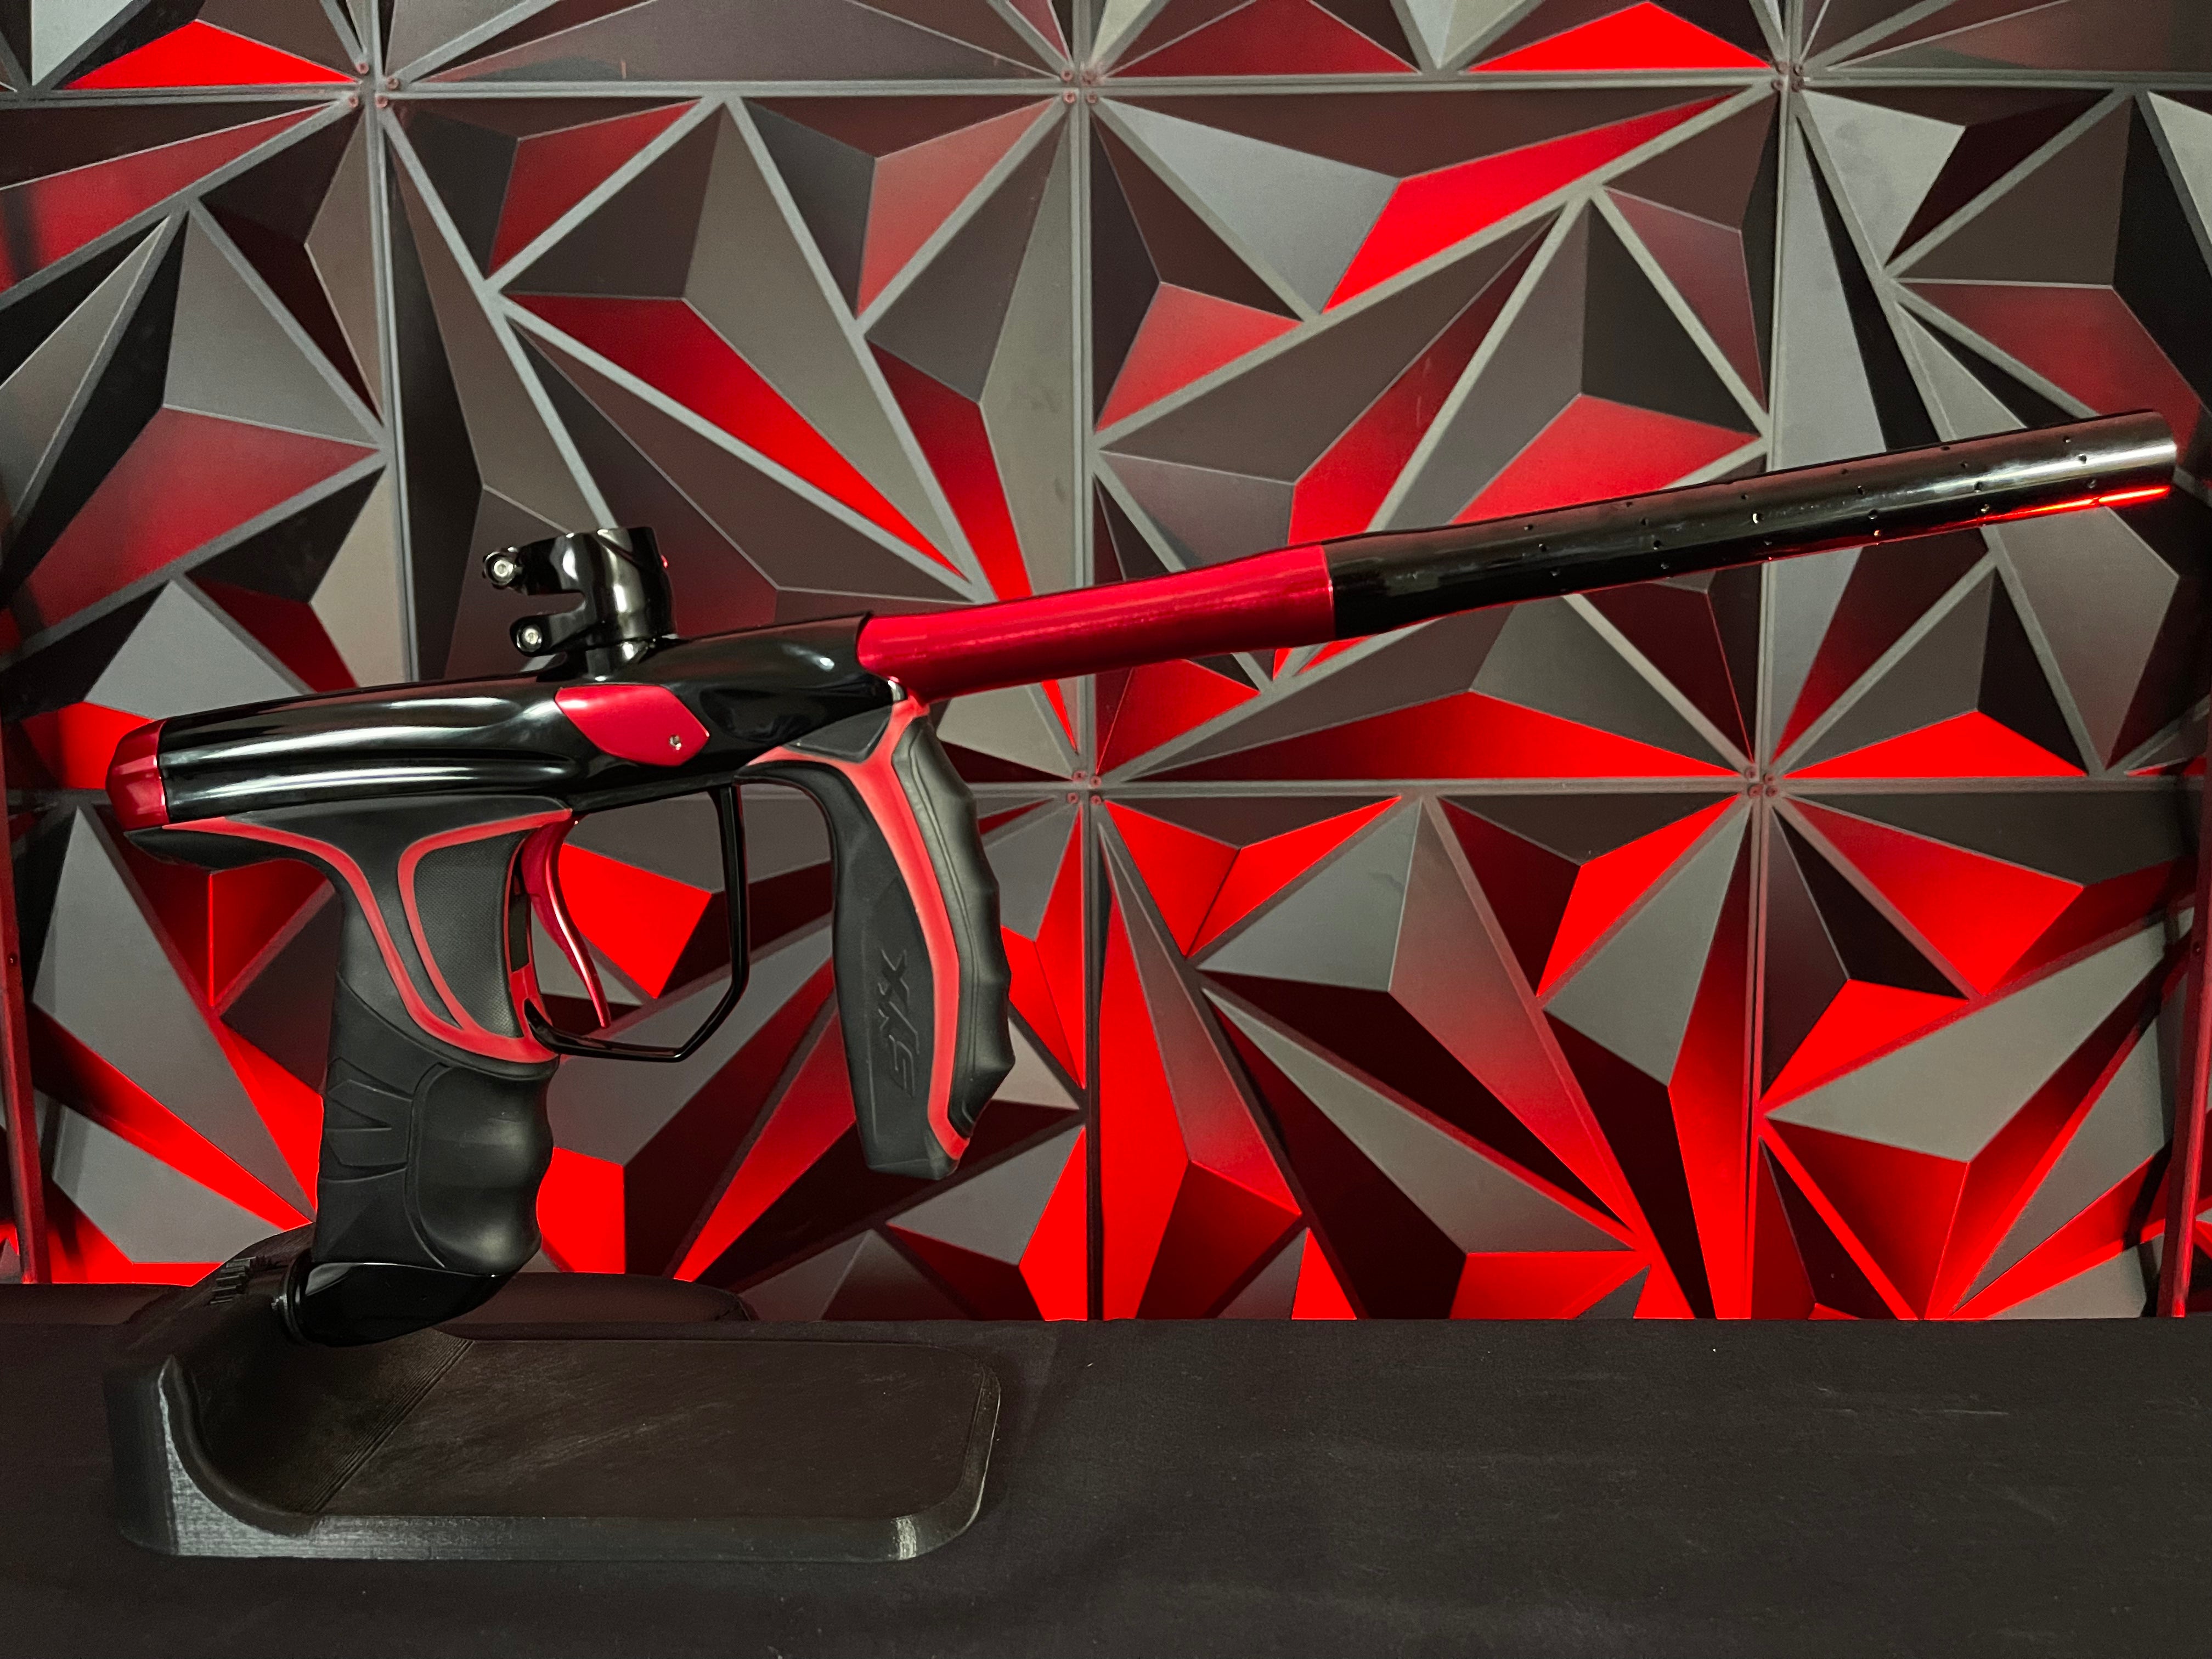 Used Empire Syx Paintball Gun - Polished Black/Red